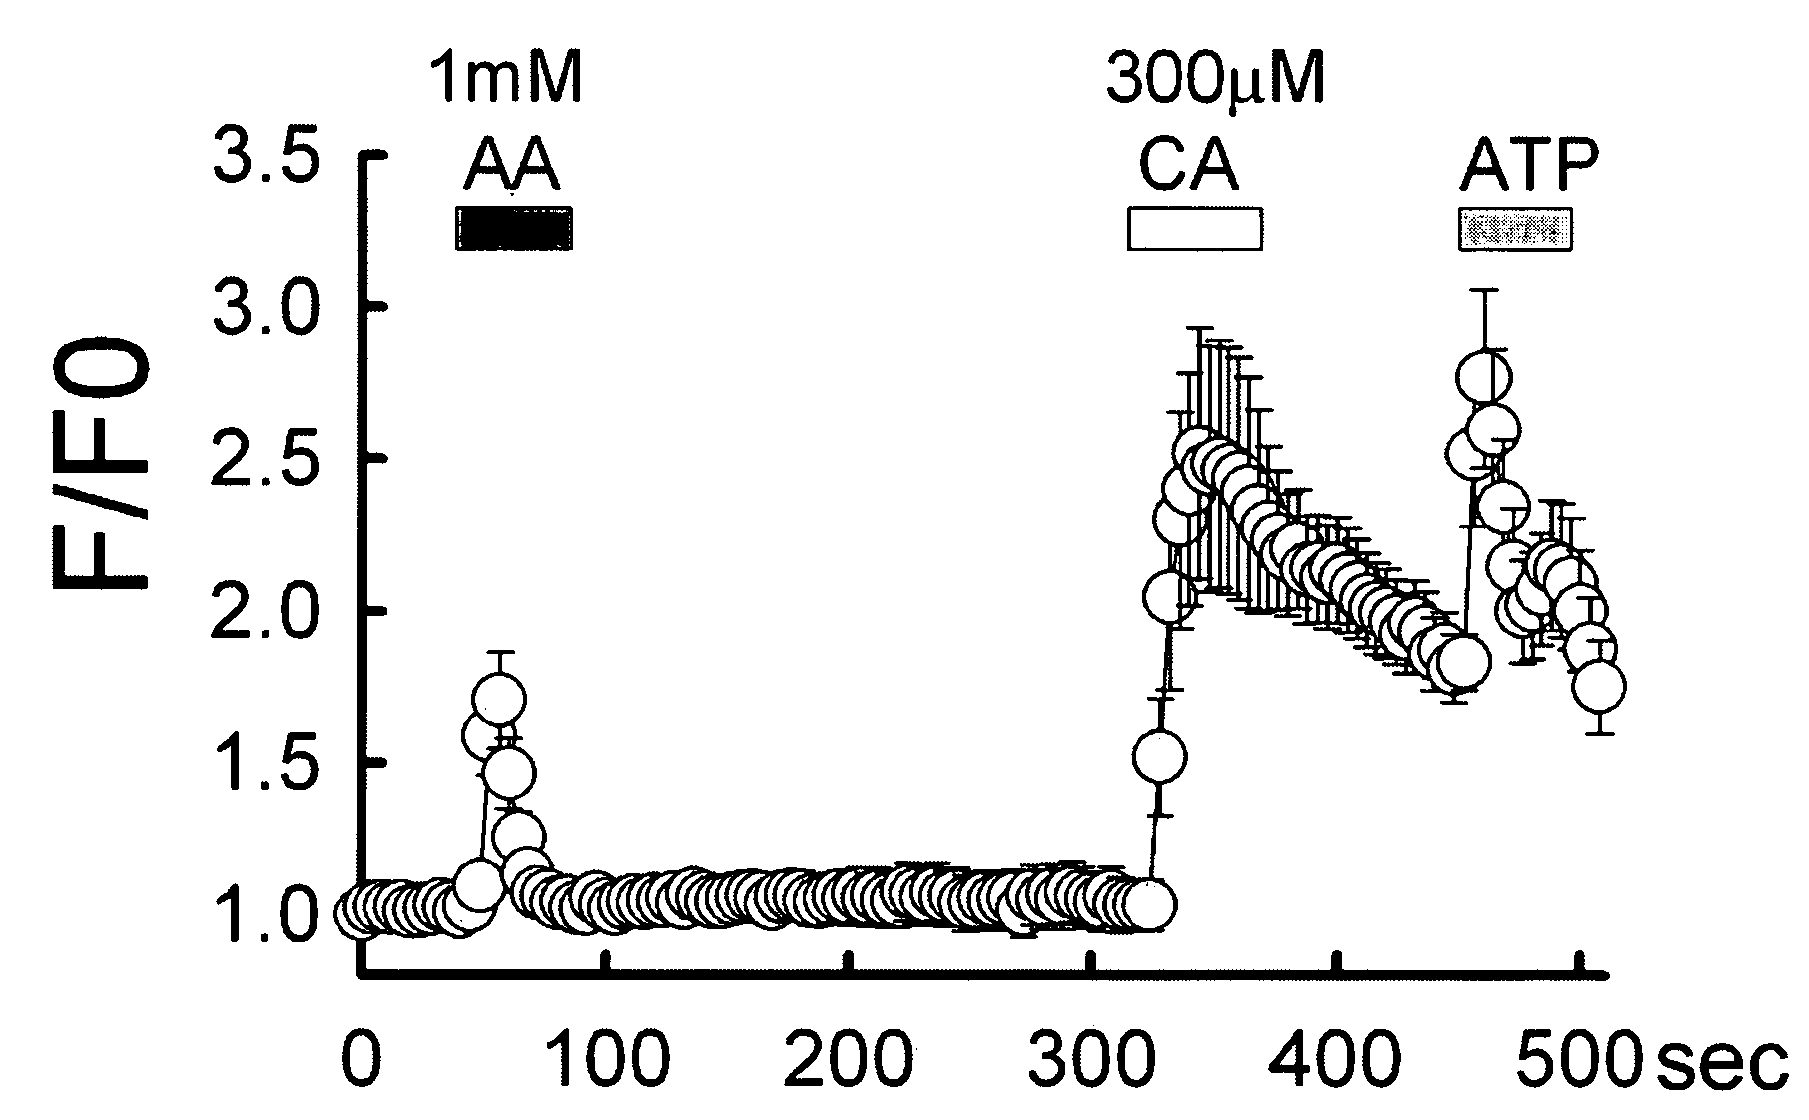 Method for activation of transient receptor potential cation channel, subfamily a, member 1 using acetaldehyde